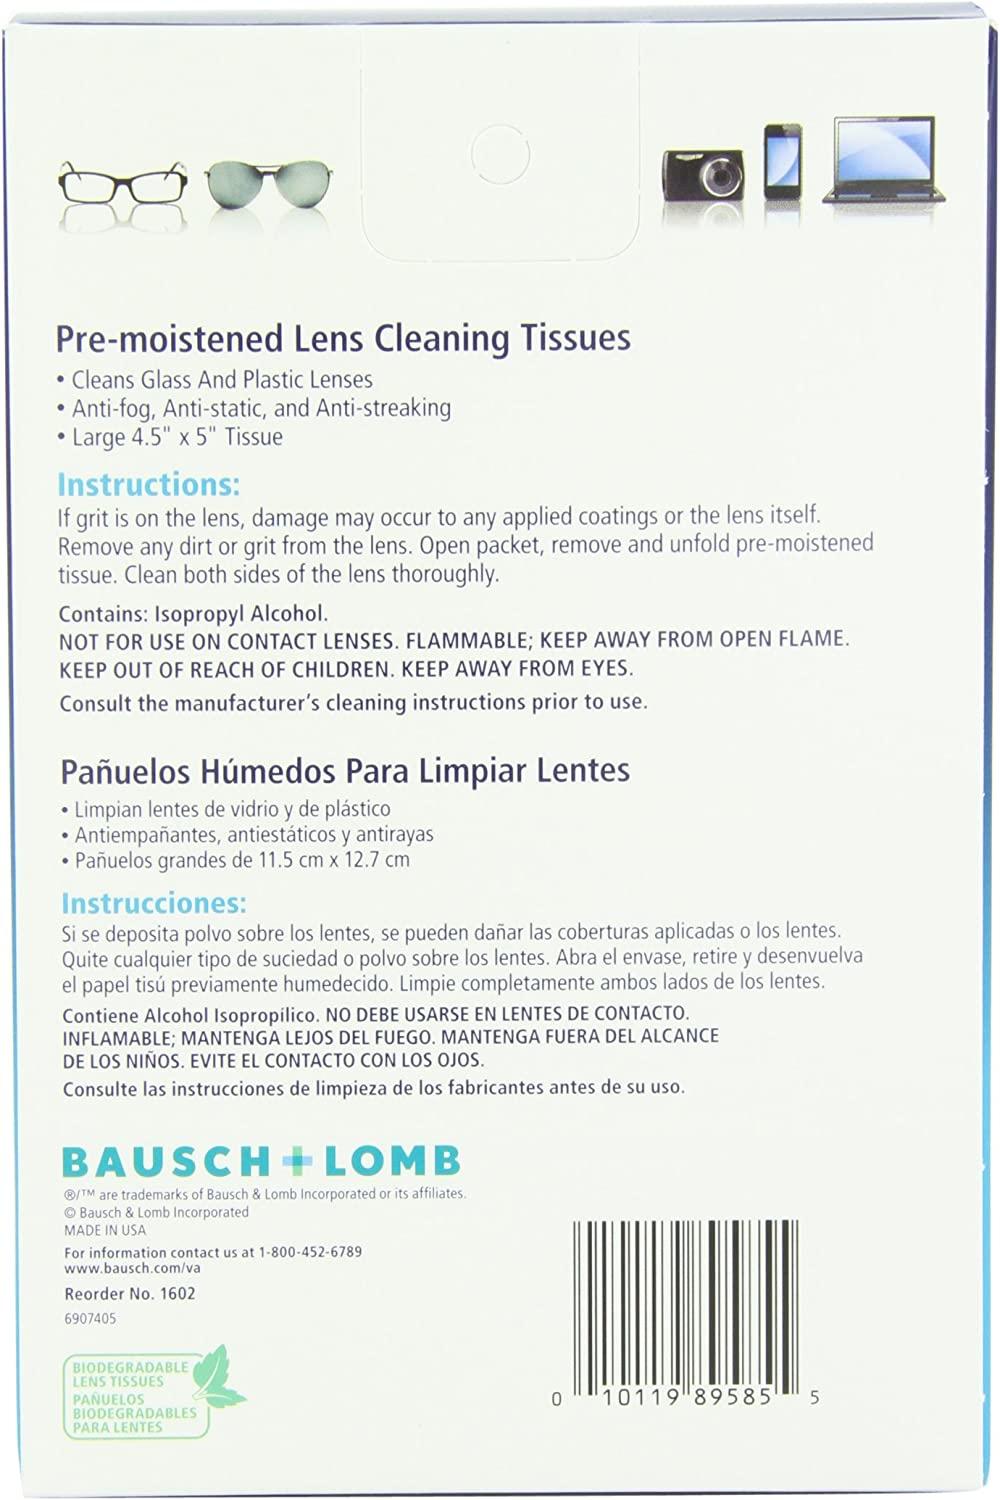 Bausch & Lomb Sight Savers Premoistened Lens Cleaning Tissues, 100